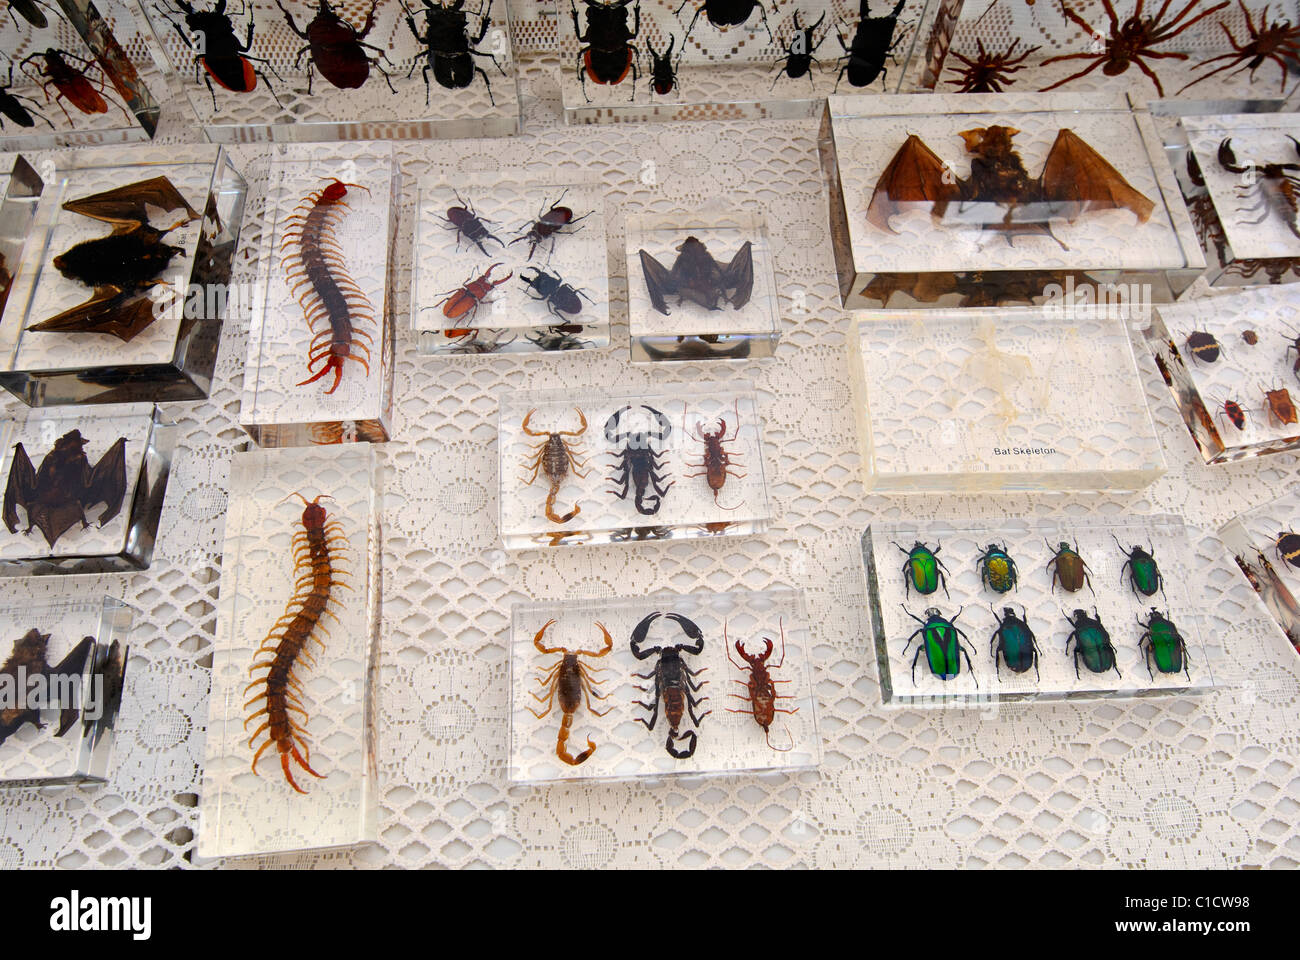 Real Bugs tent sells real insects and bugs in clear resin in many forms including jewelery and decorations. Stock Photo